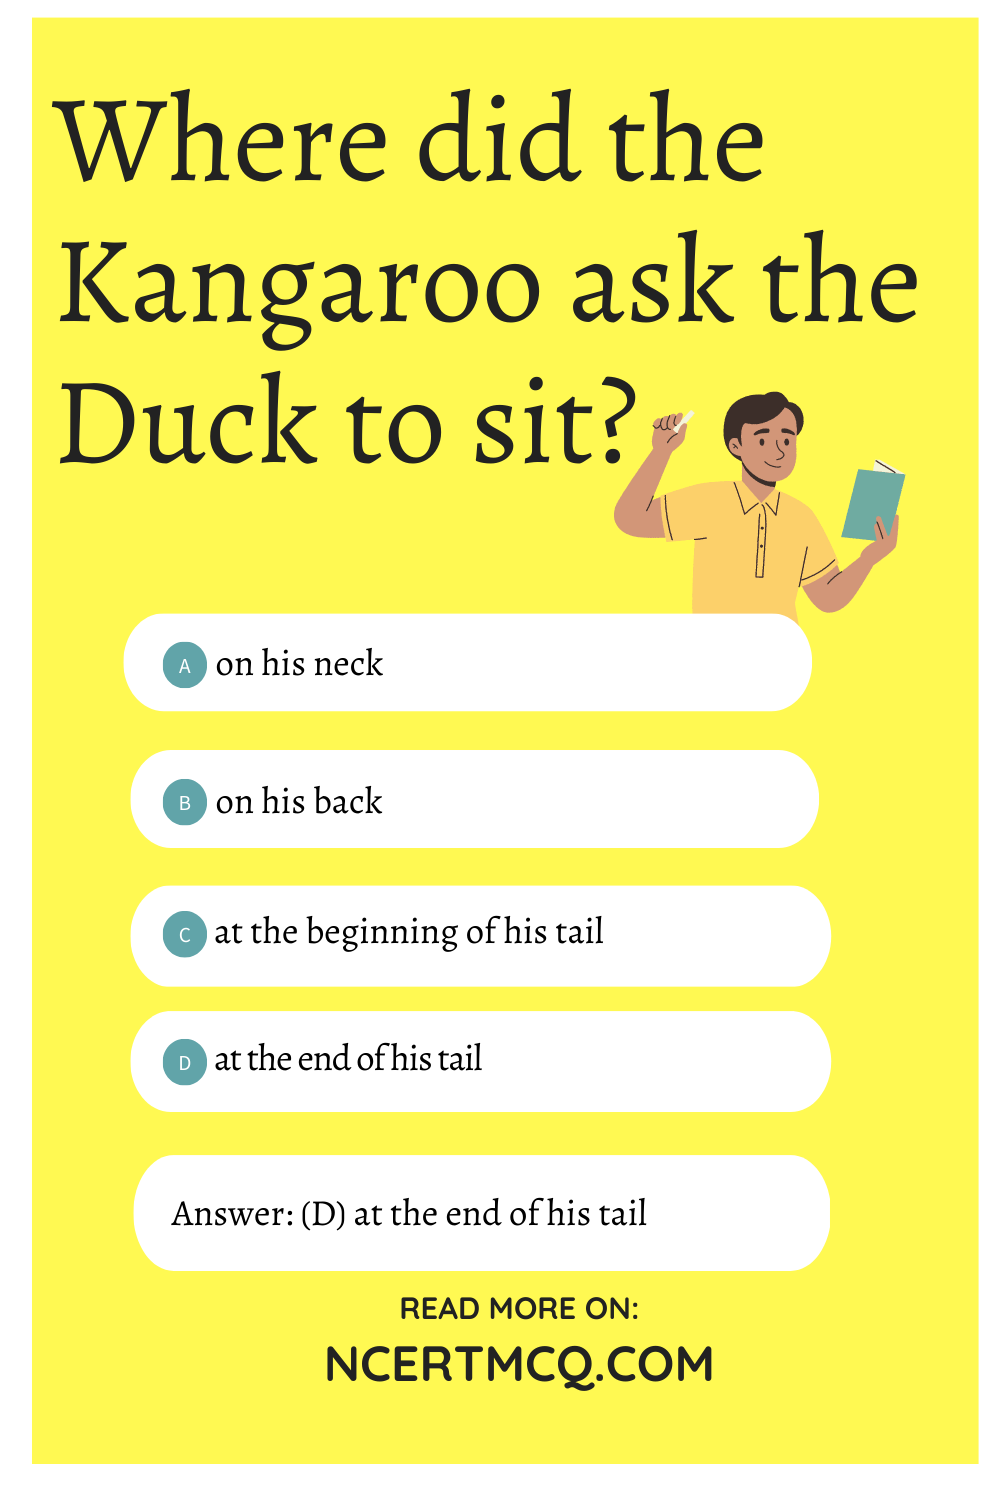 Where did the Kangaroo ask the Duck to sit?